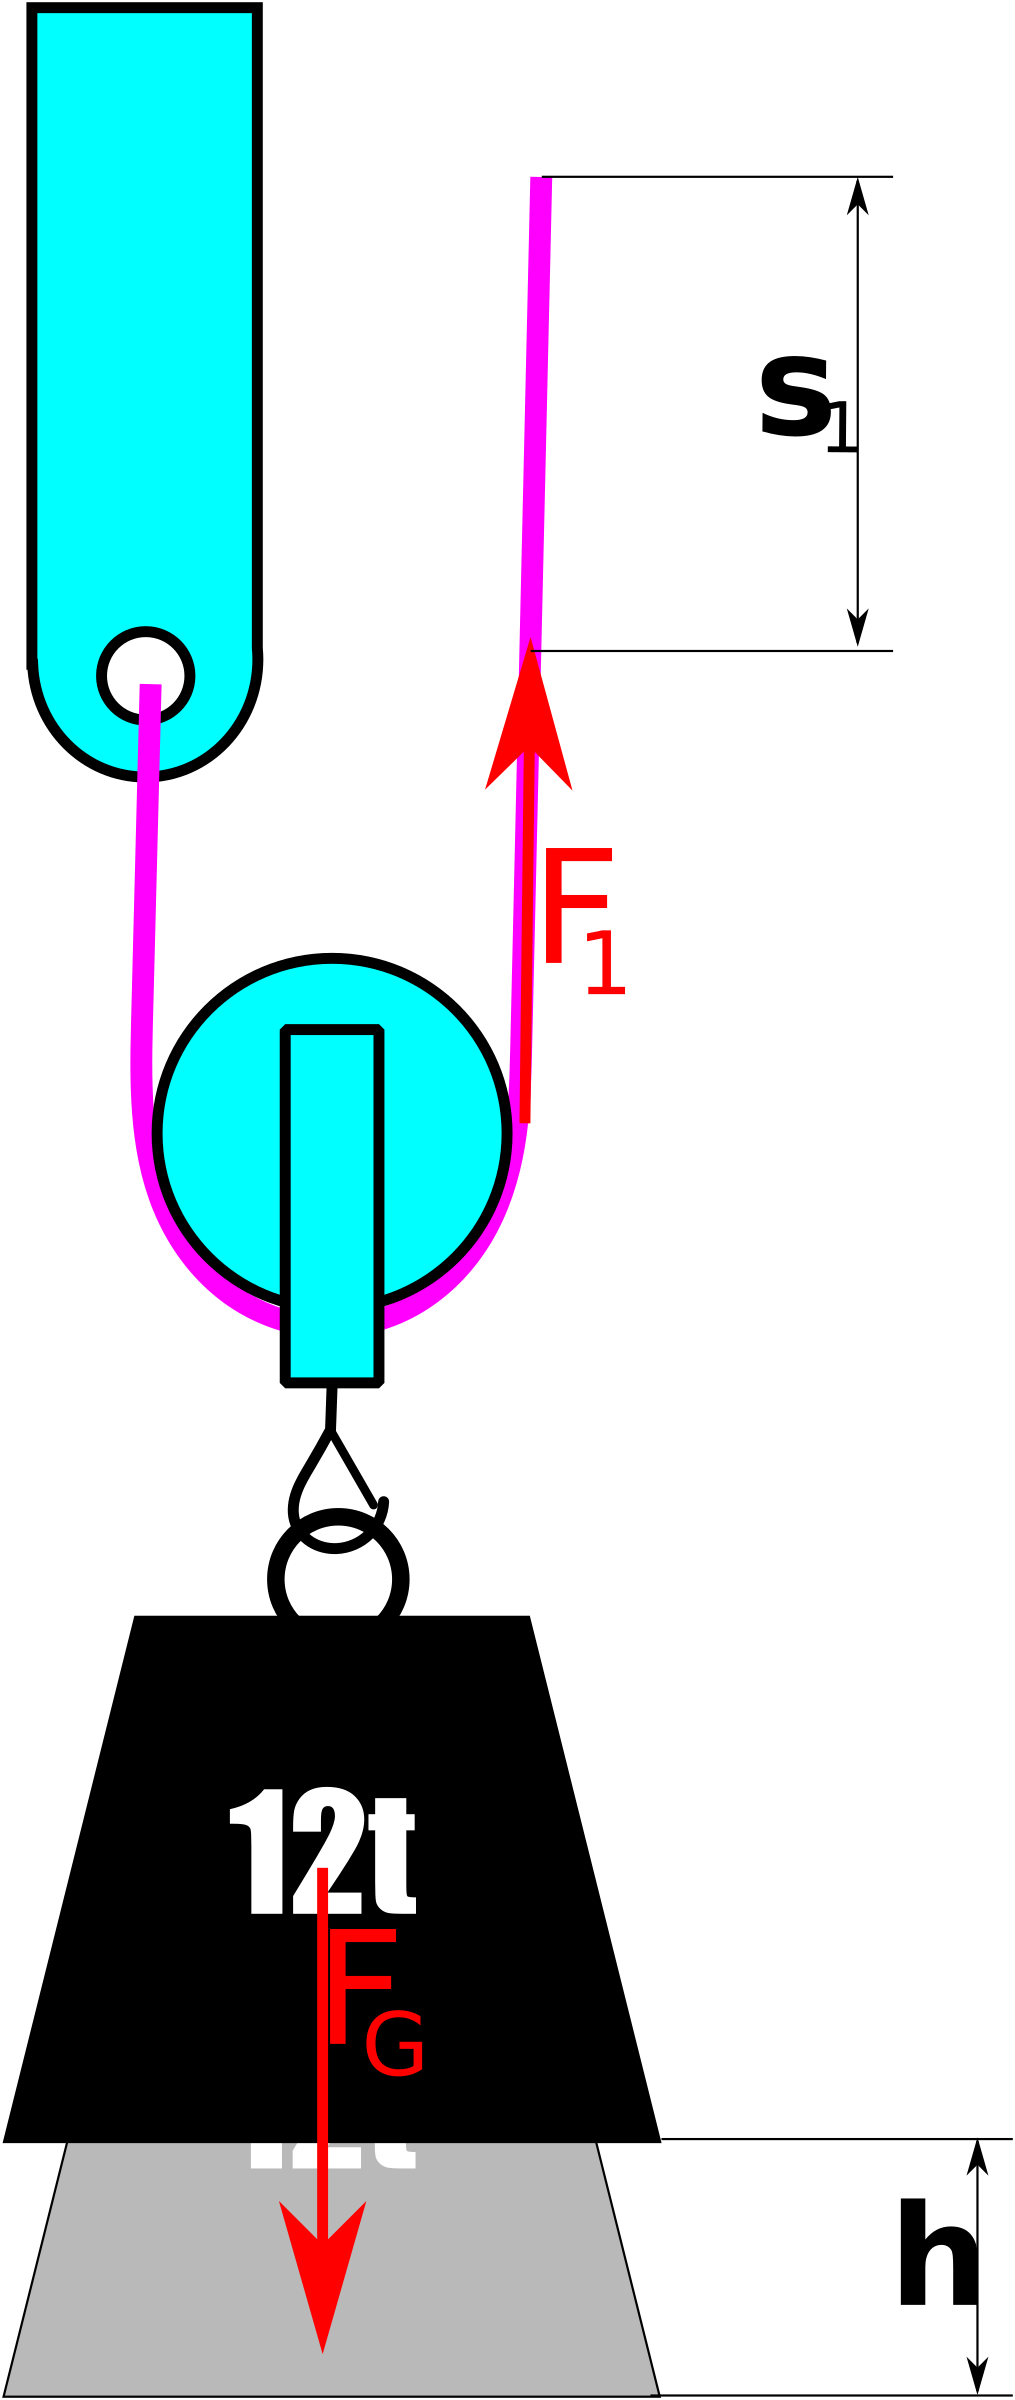 Moving Pulley - Pulley (1015x2400)